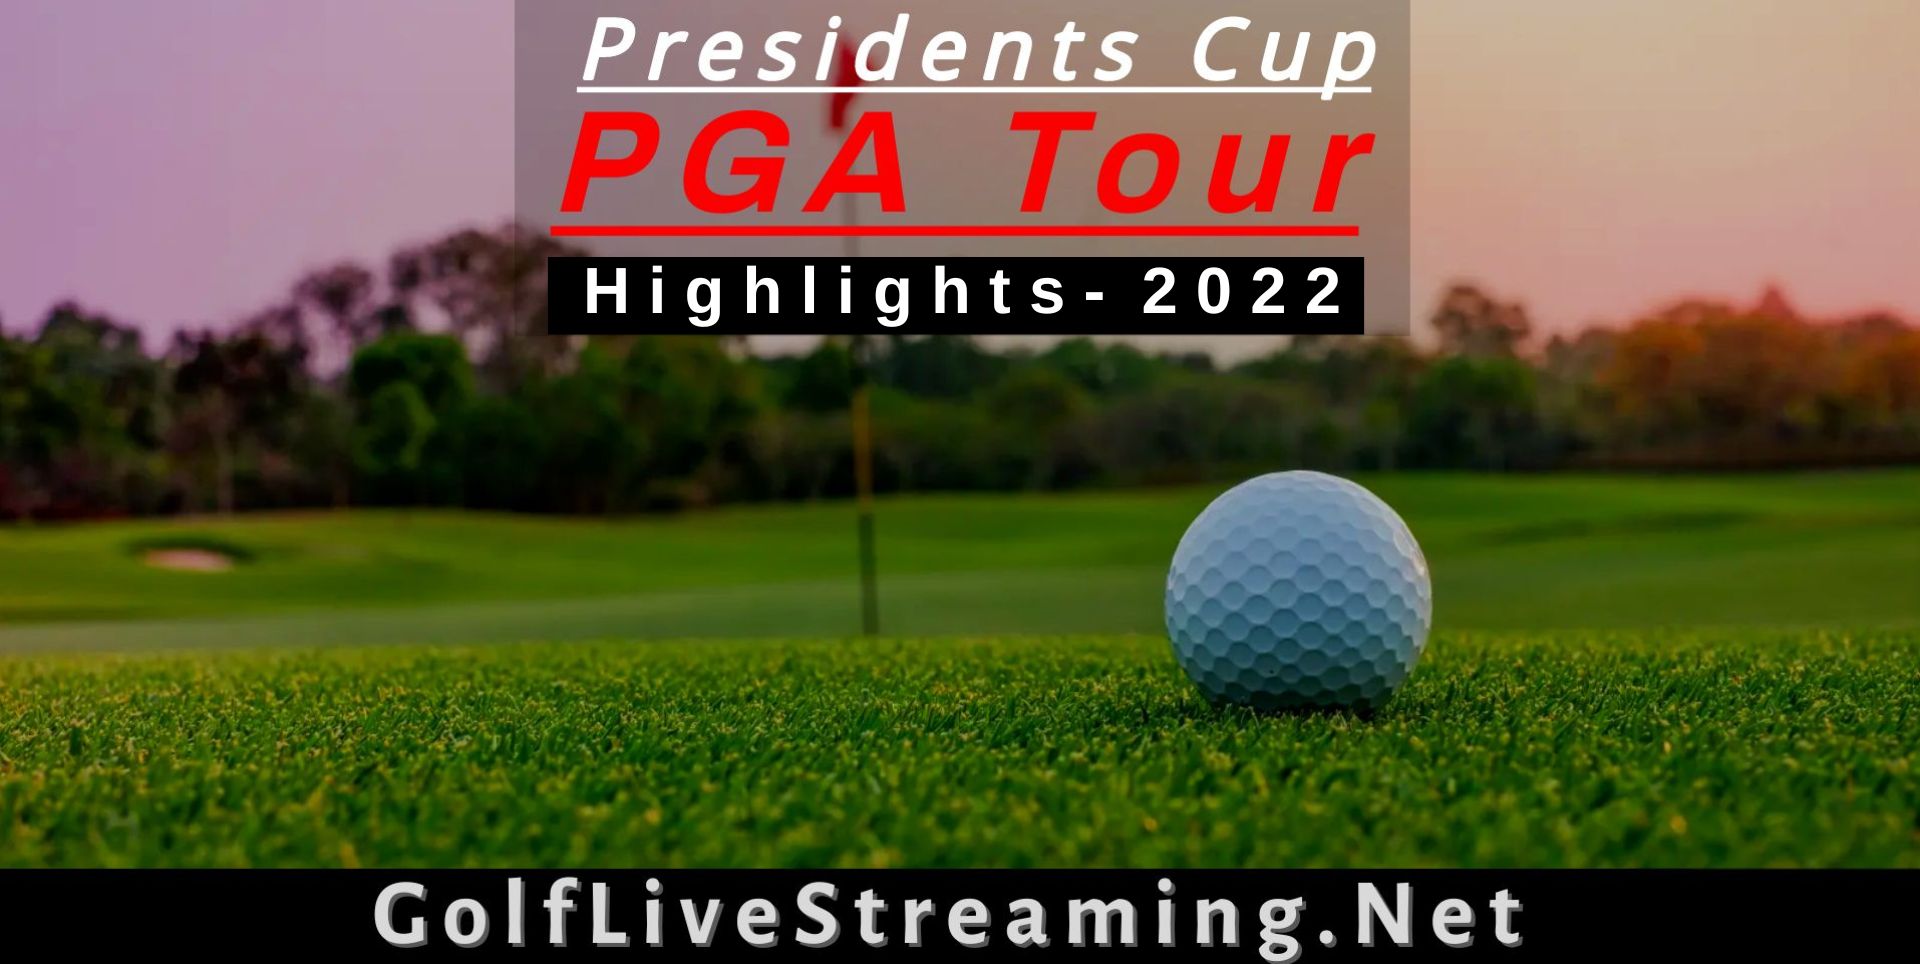 Presidents Cup Round 1 Highlights 2022 PGA Tour